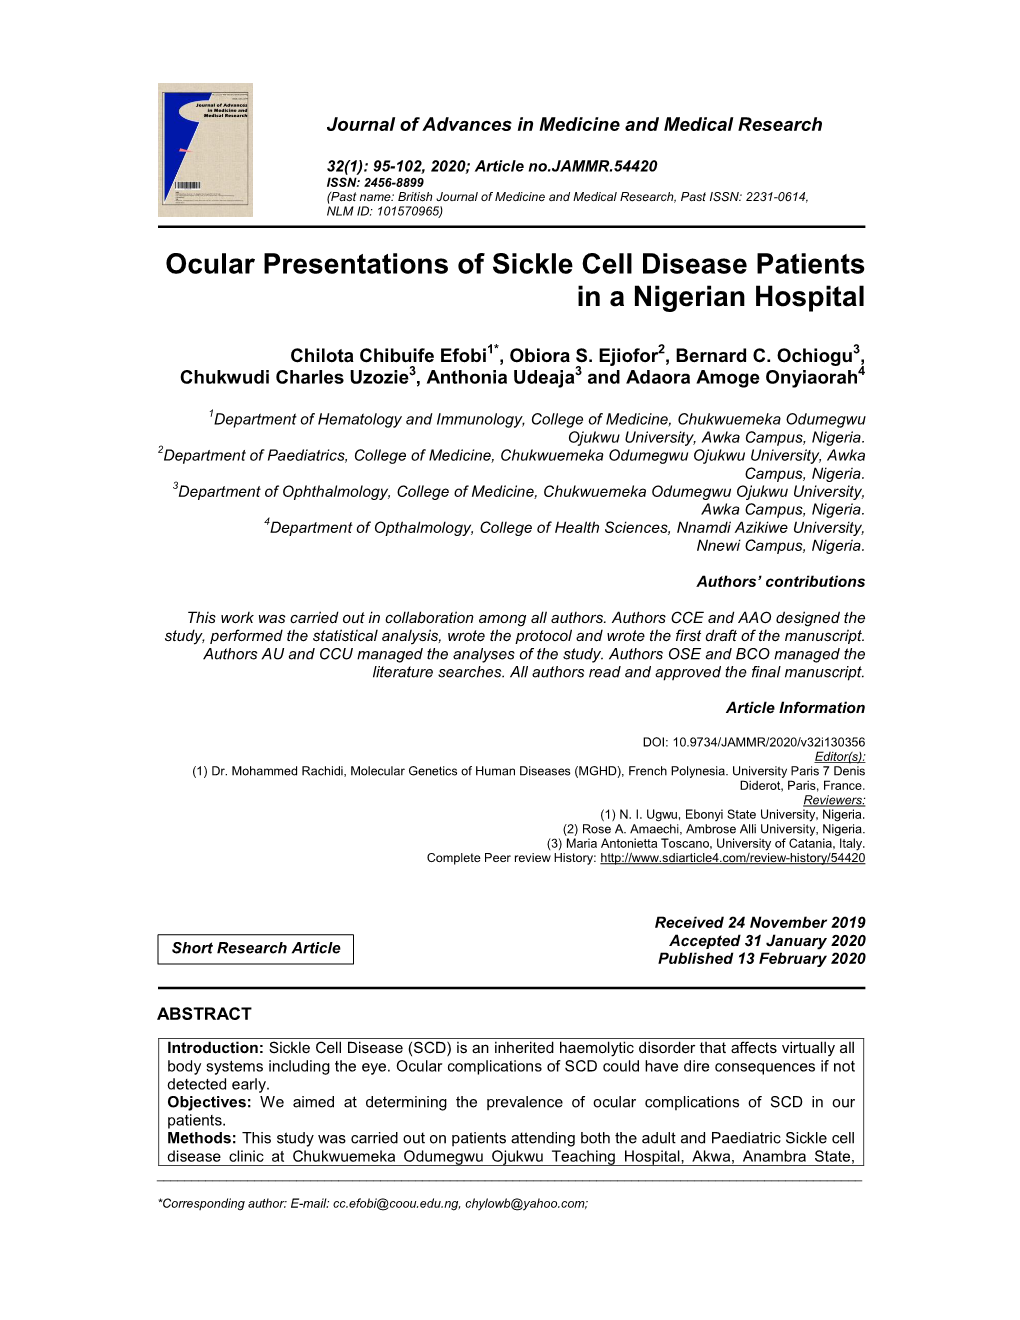 Ocular Presentations of Sickle Cell Disease Patients in a Nigerian Hospital